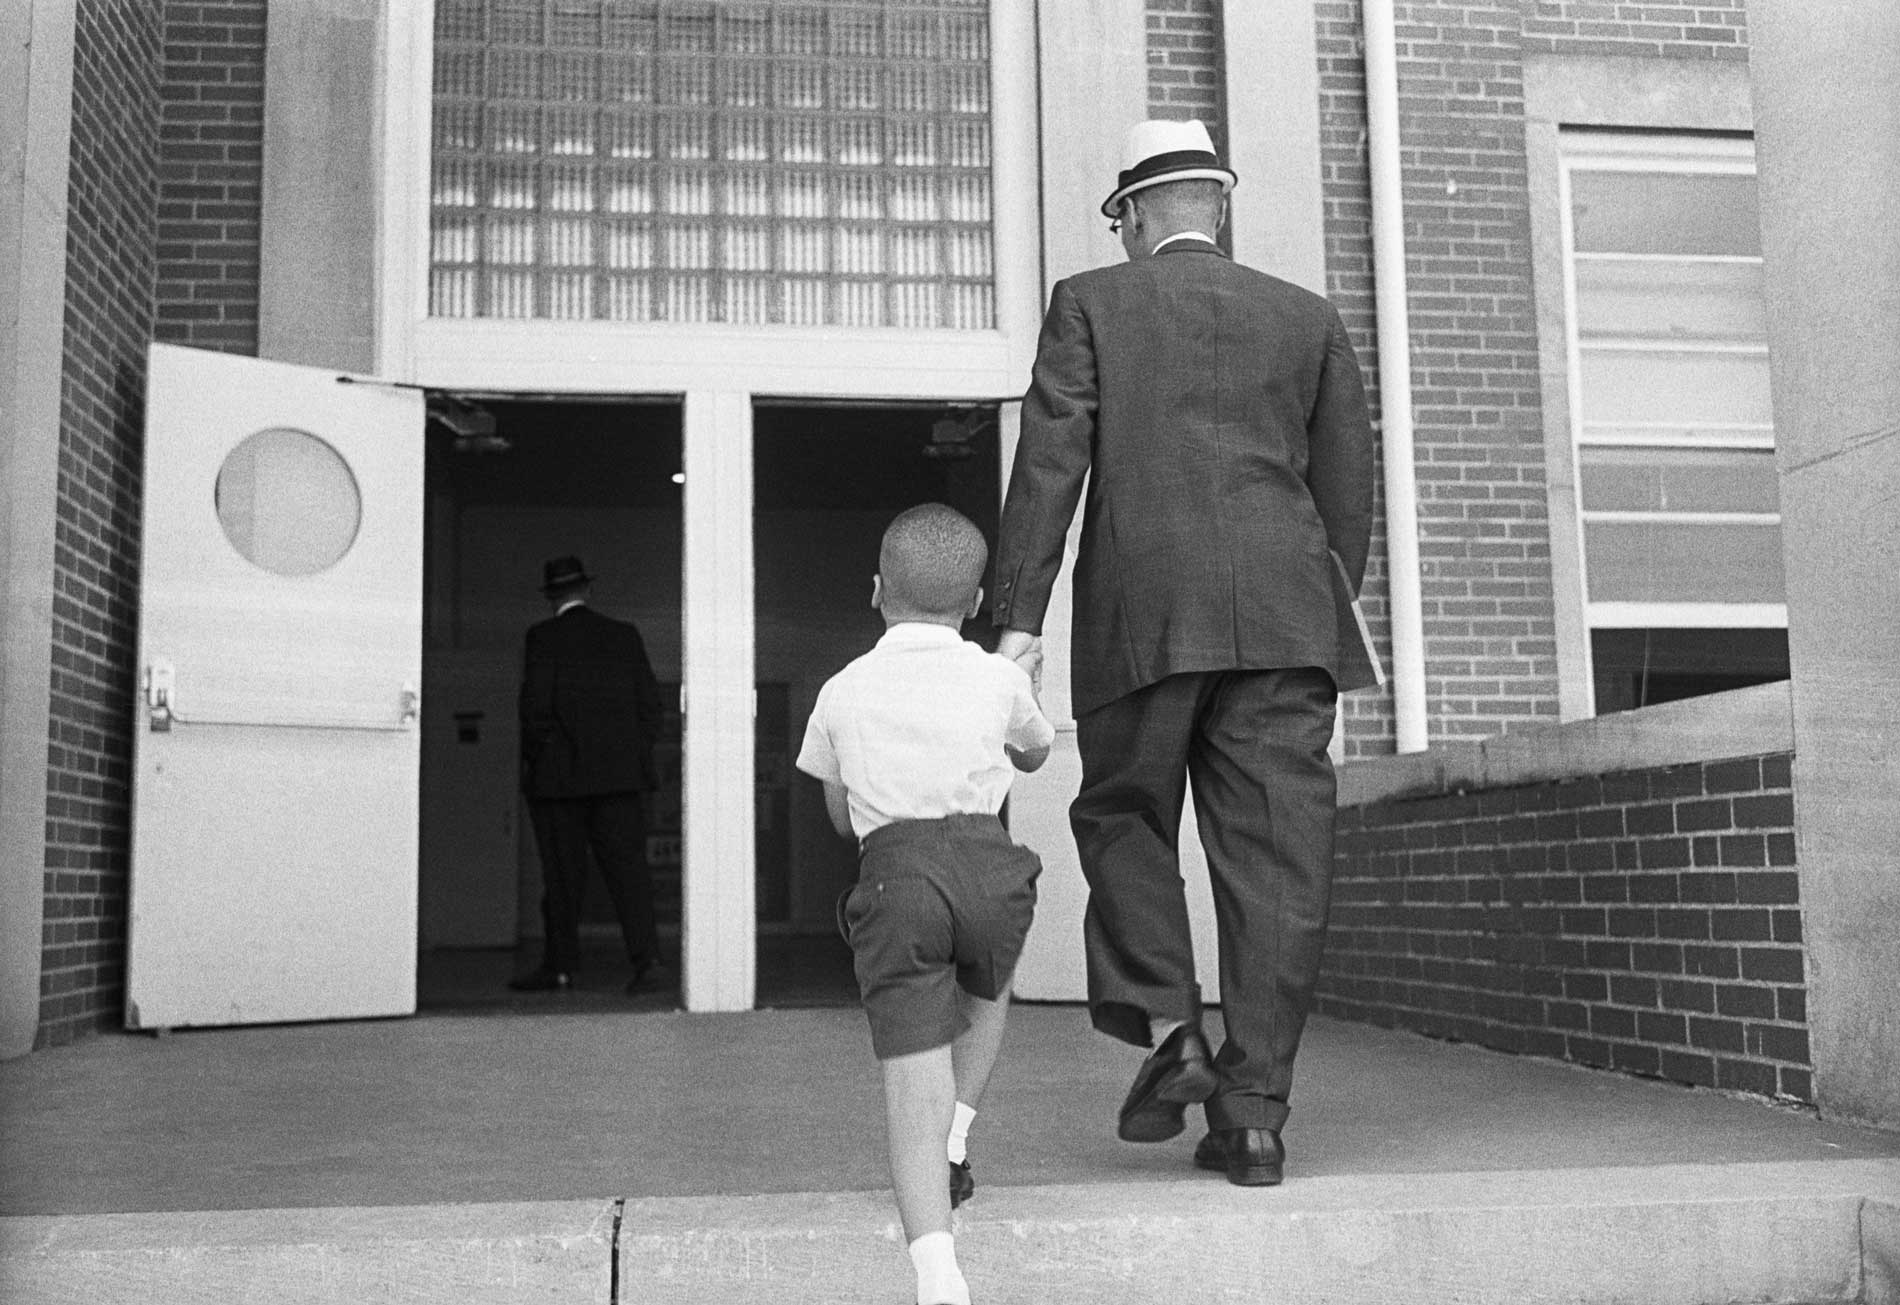 Dr. Sonnie Hereford III accompanies his six-year-old son, Sonnie Hereford IV, to school on September 9, 1963. Bettmann/Getty Images